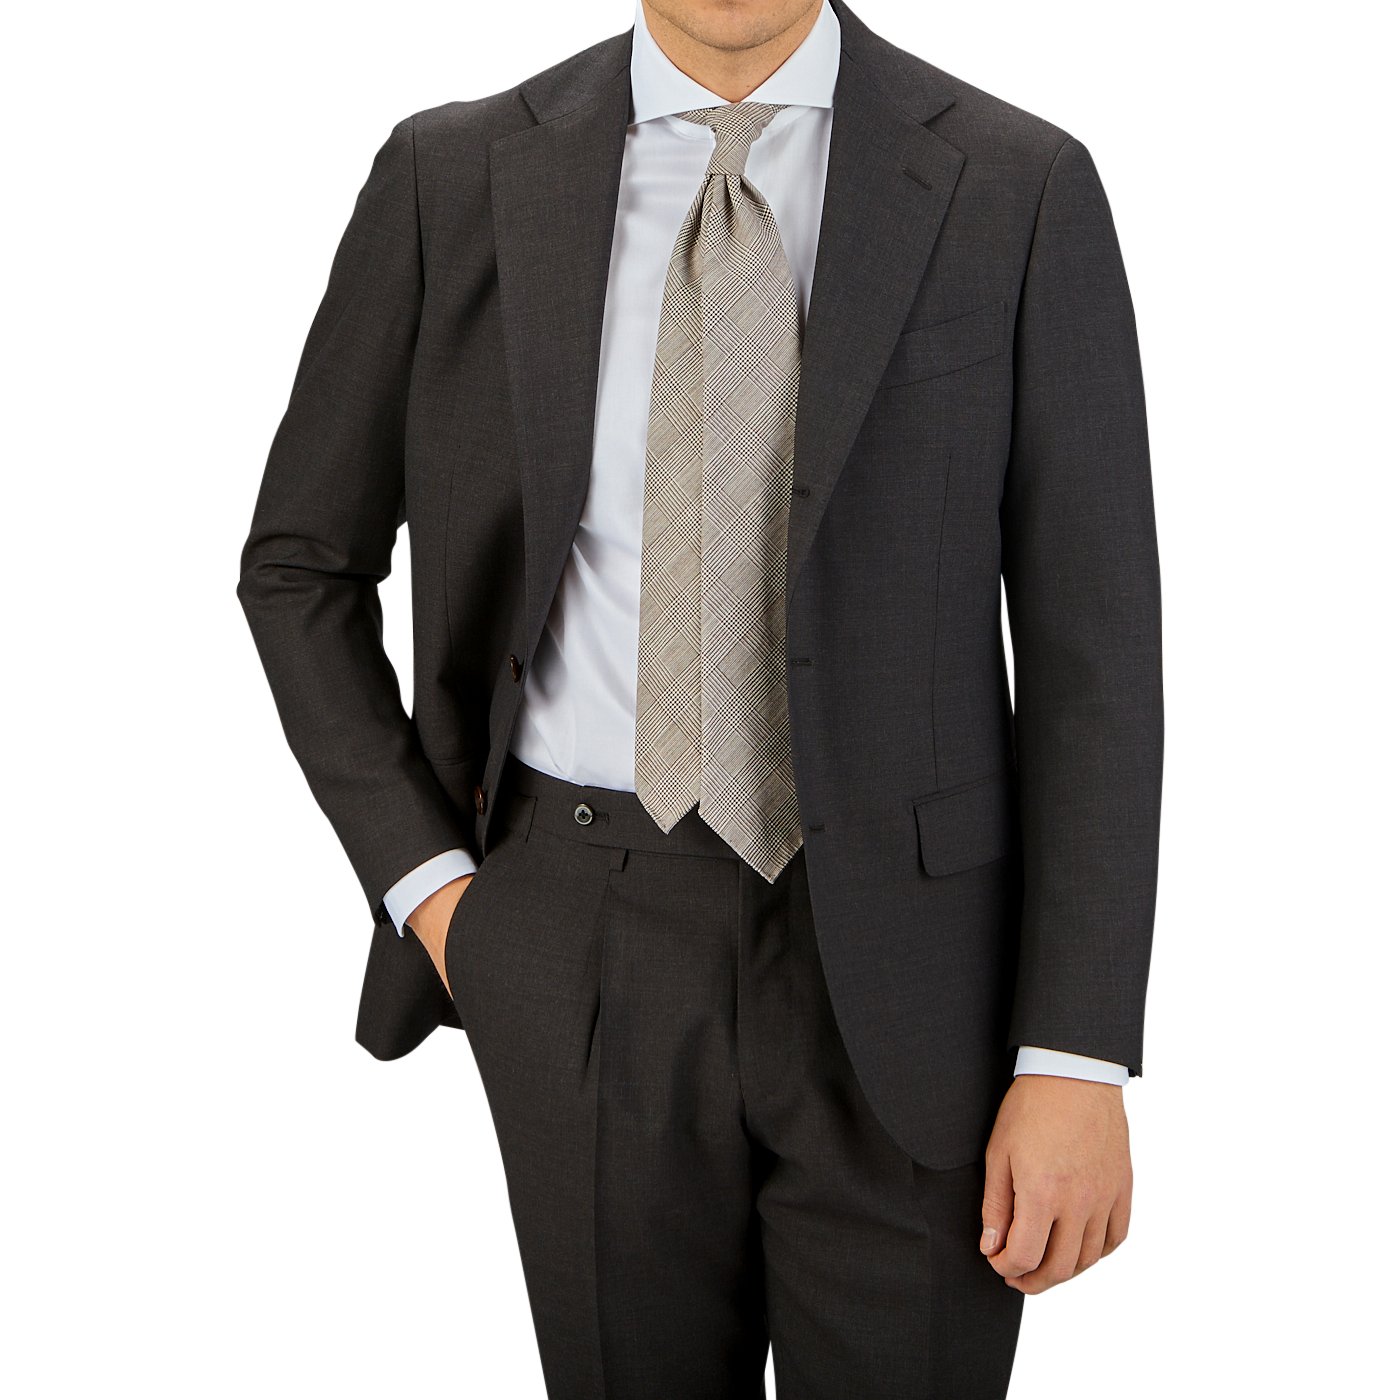 A man in a Ring Jacket dark brown high twist wool suit with a white shirt and plaid tie stands against a neutral background, cropped at the chest.